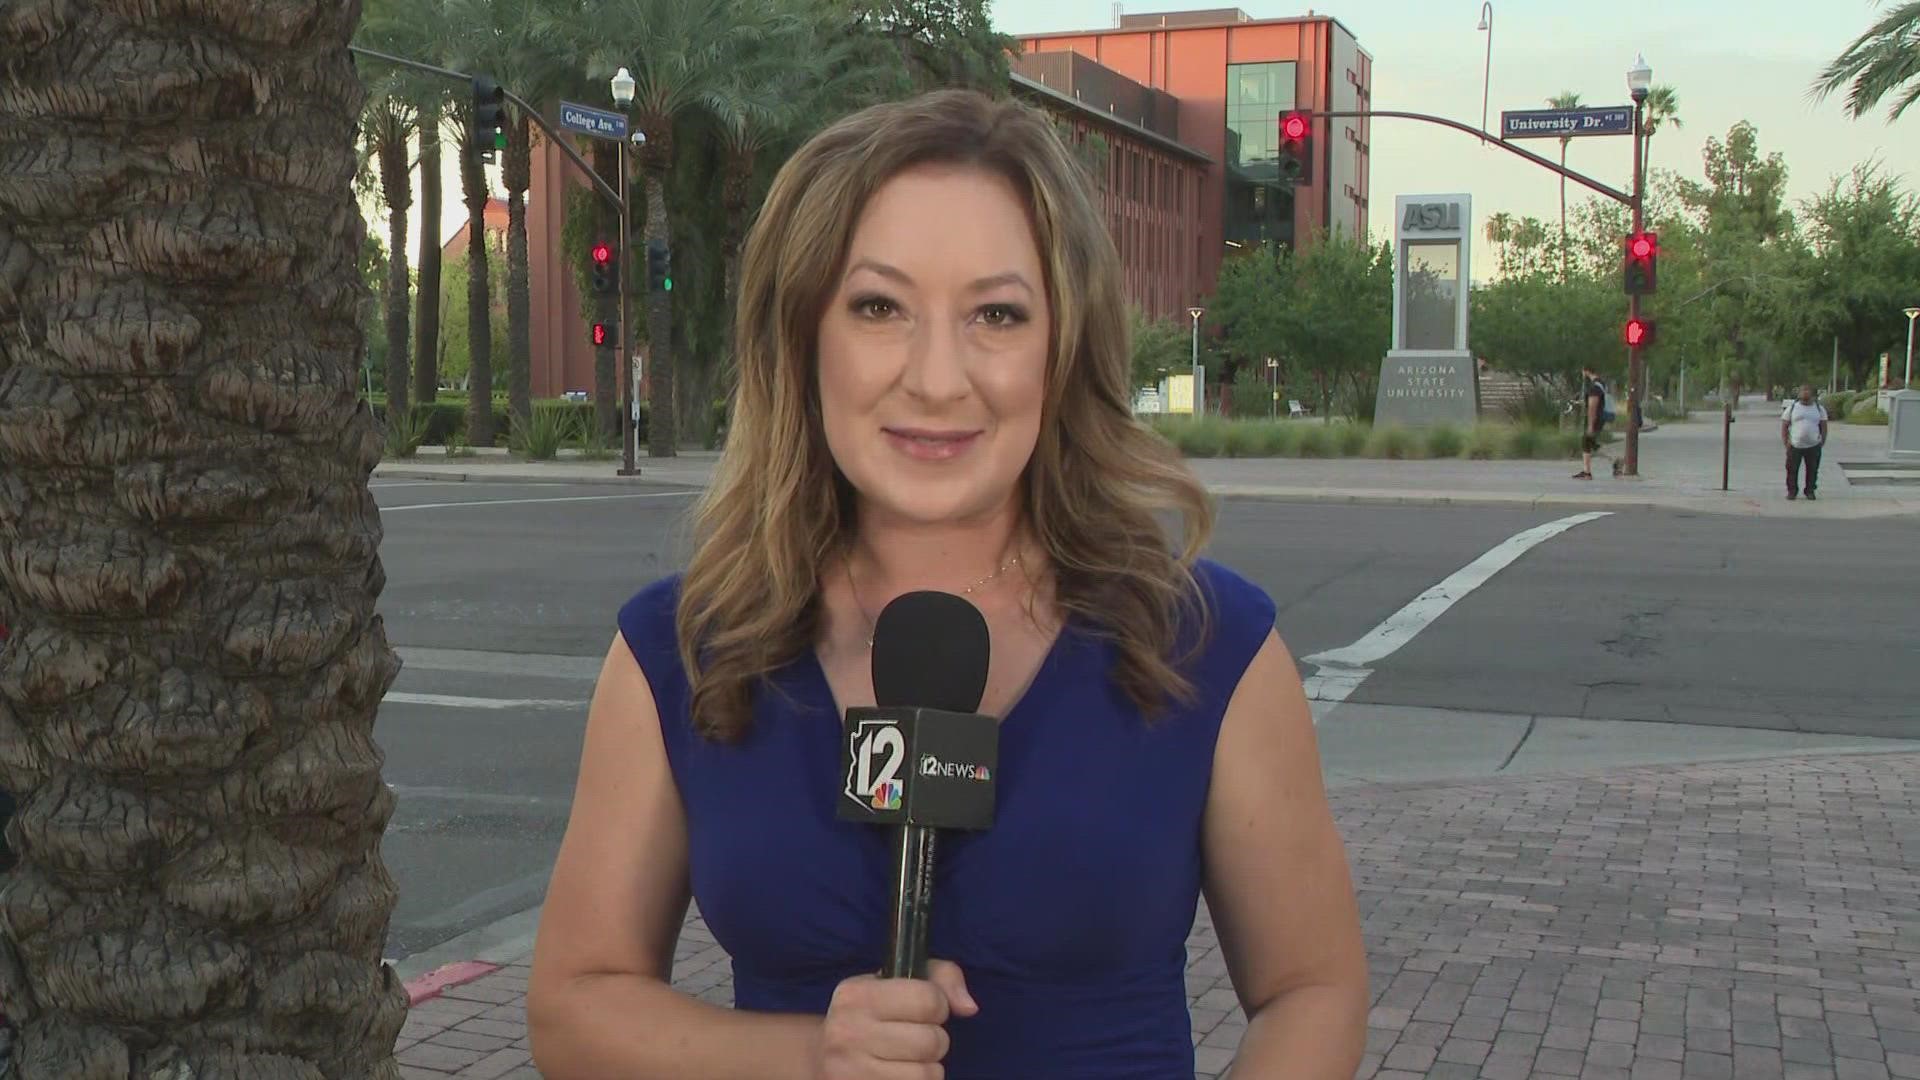 Students are back at ASU campuses across the Valley as the college announced record enrollment for the fall semester. Jen Wahl has the details.